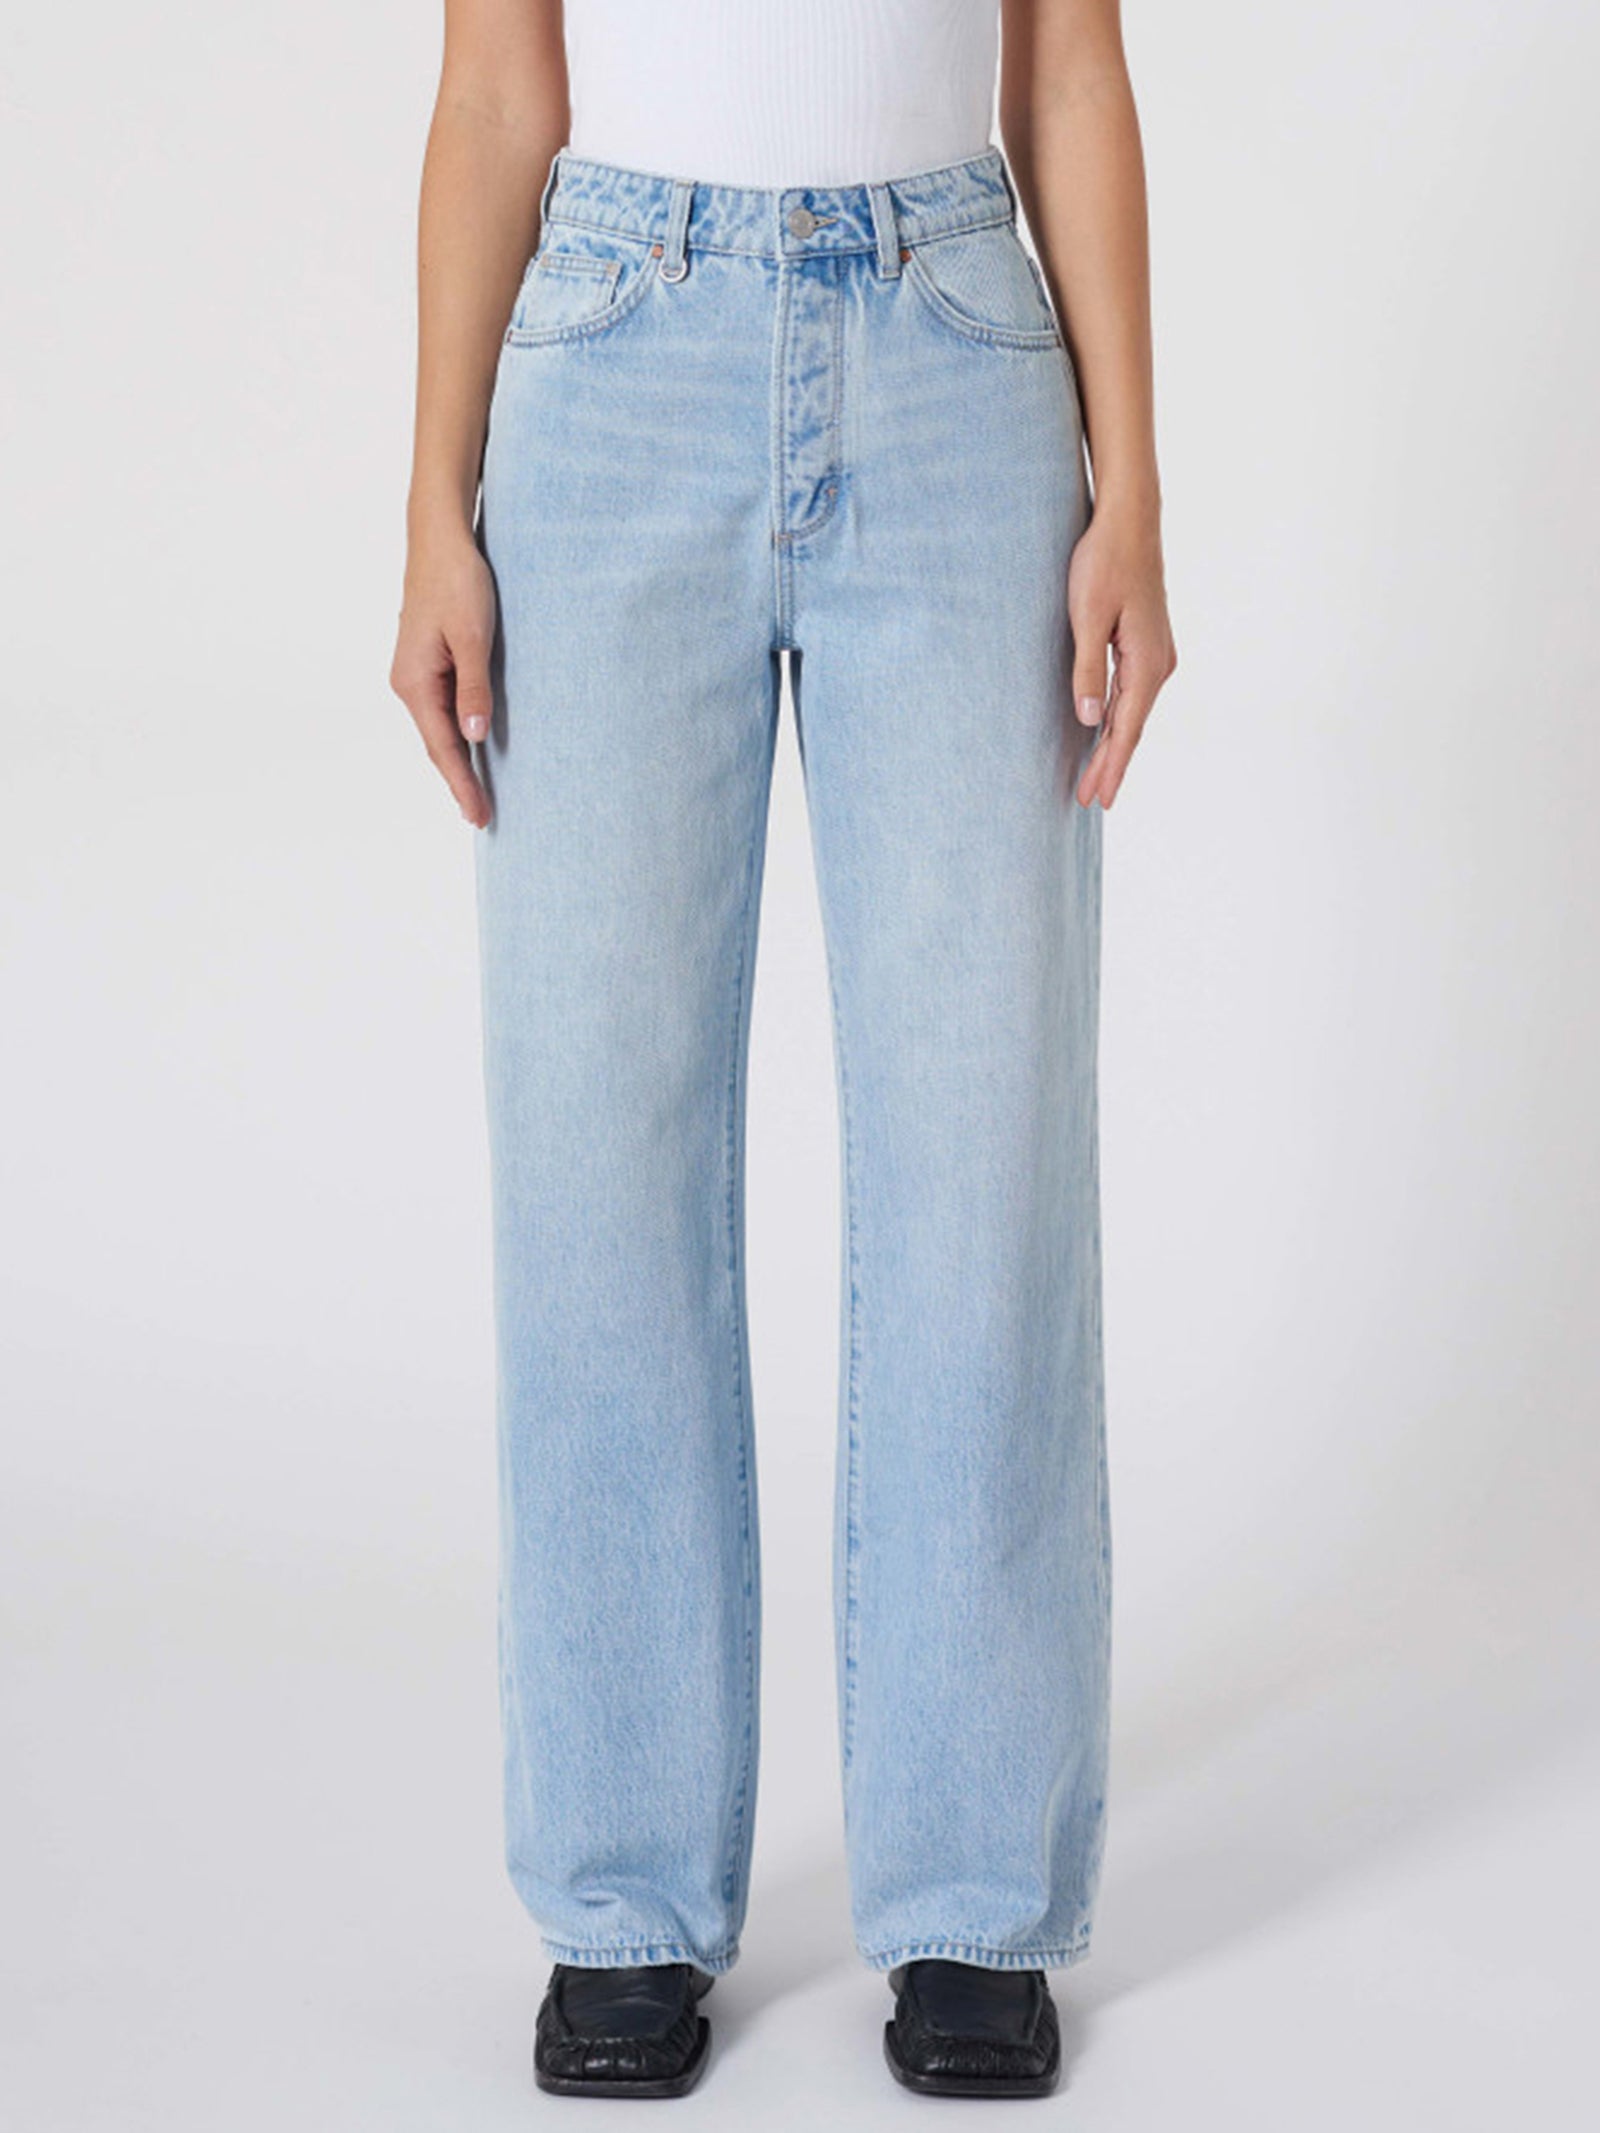 Coco Relaxed Jeans in Jetlag Light Vintage Indigo - Glue Store